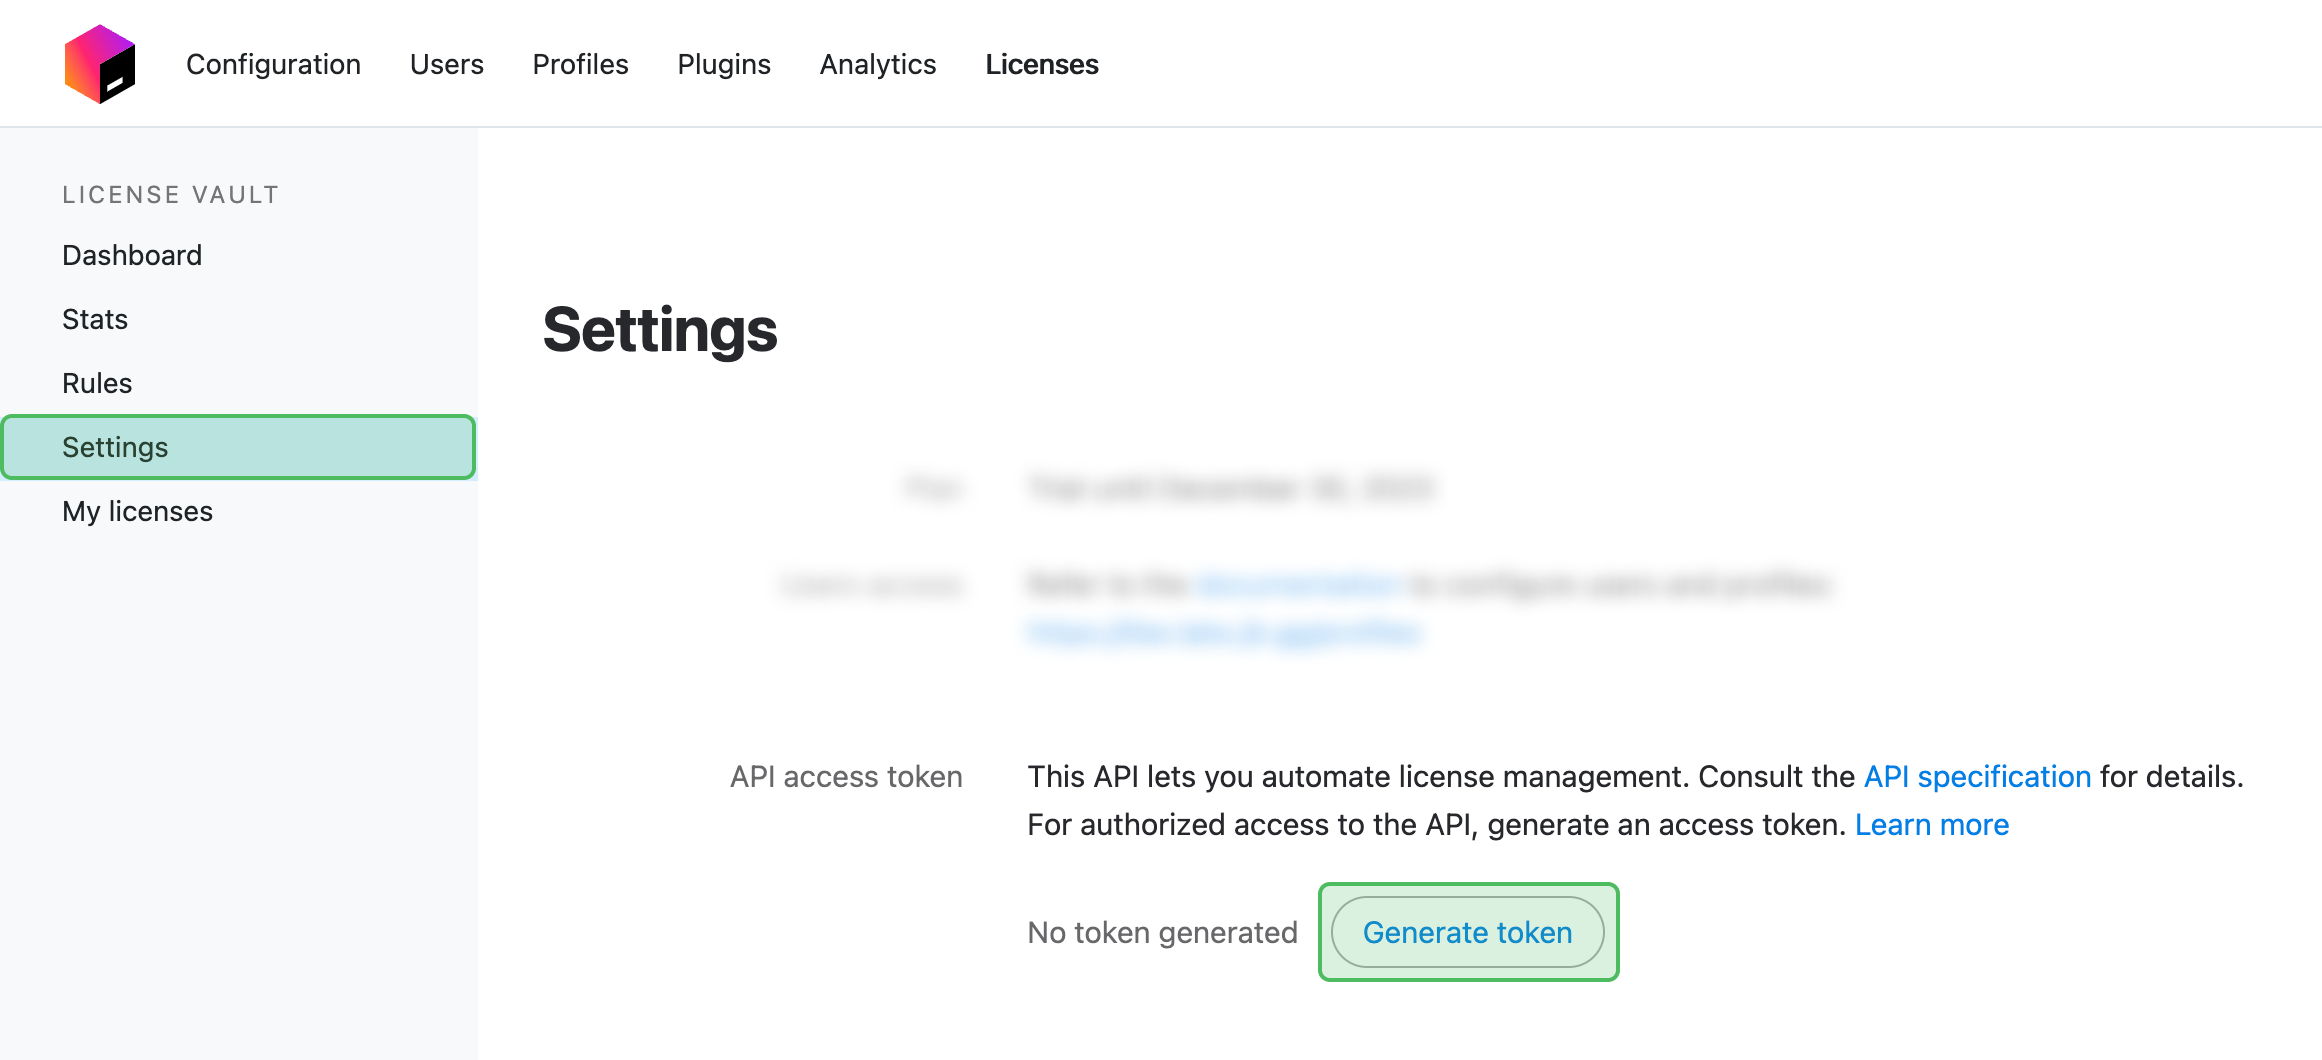 The interface that lets you generate an API access token in License Vault.